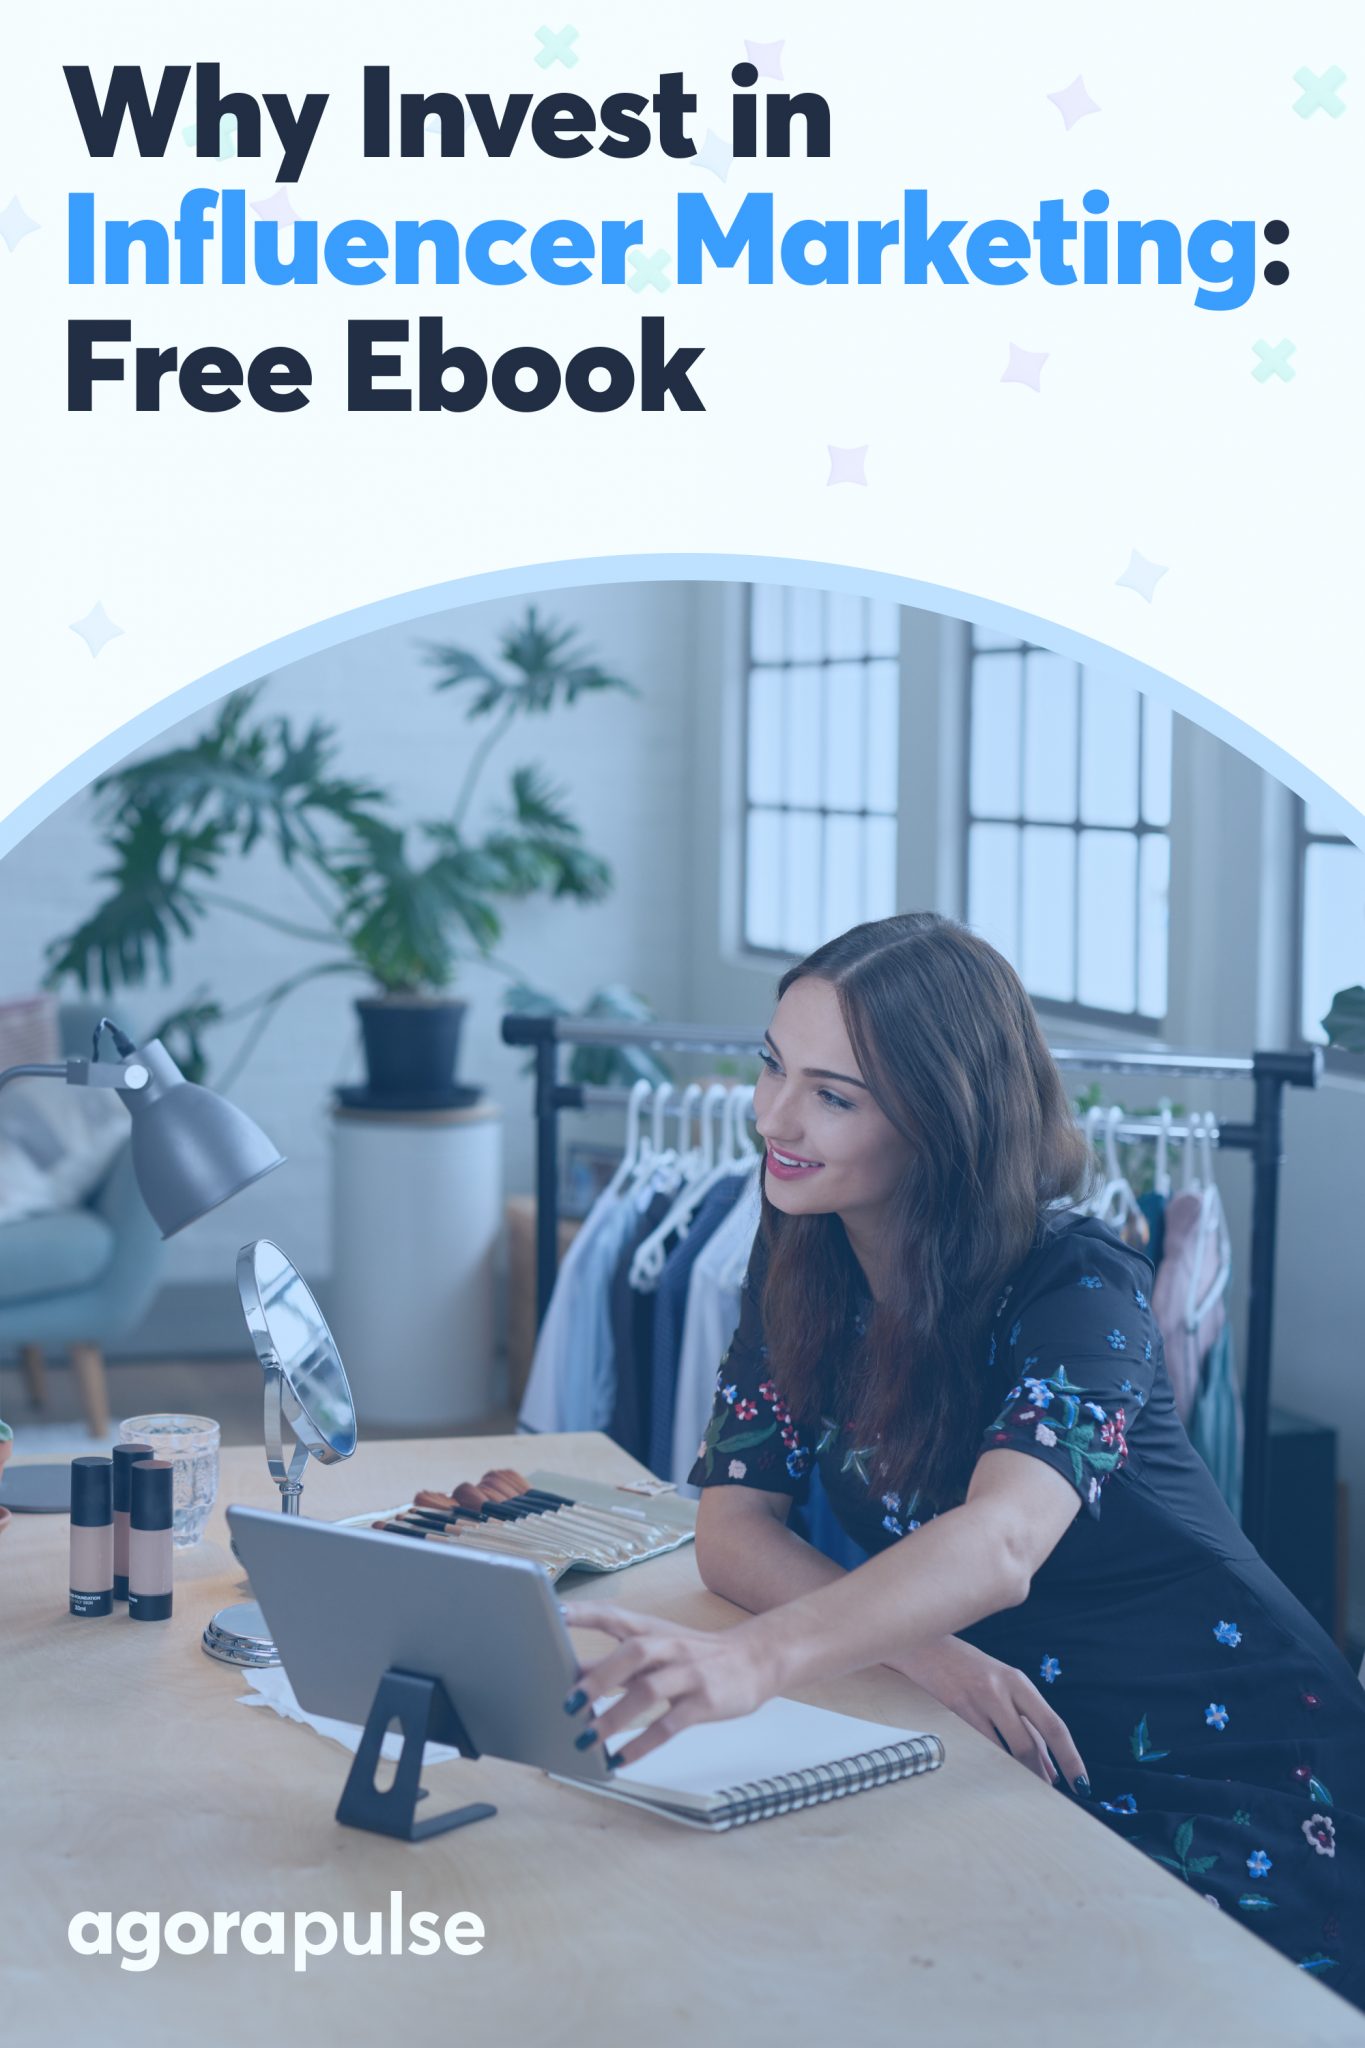 Free Ebook: How to Craft a Successful Influencer Marketing Strategy